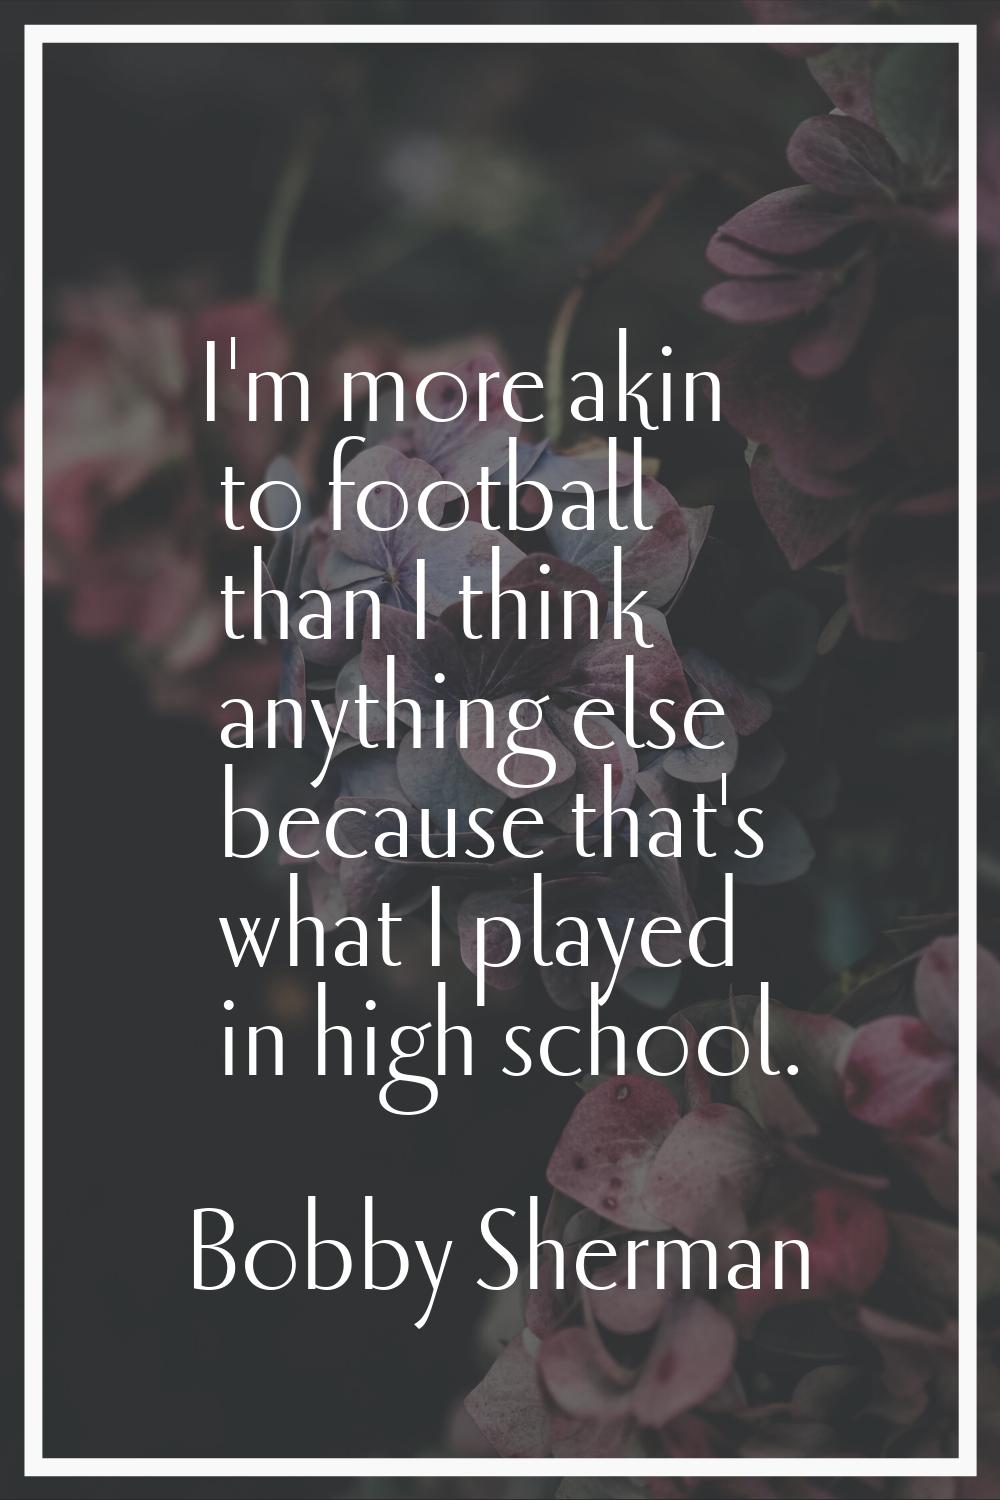 I'm more akin to football than I think anything else because that's what I played in high school.